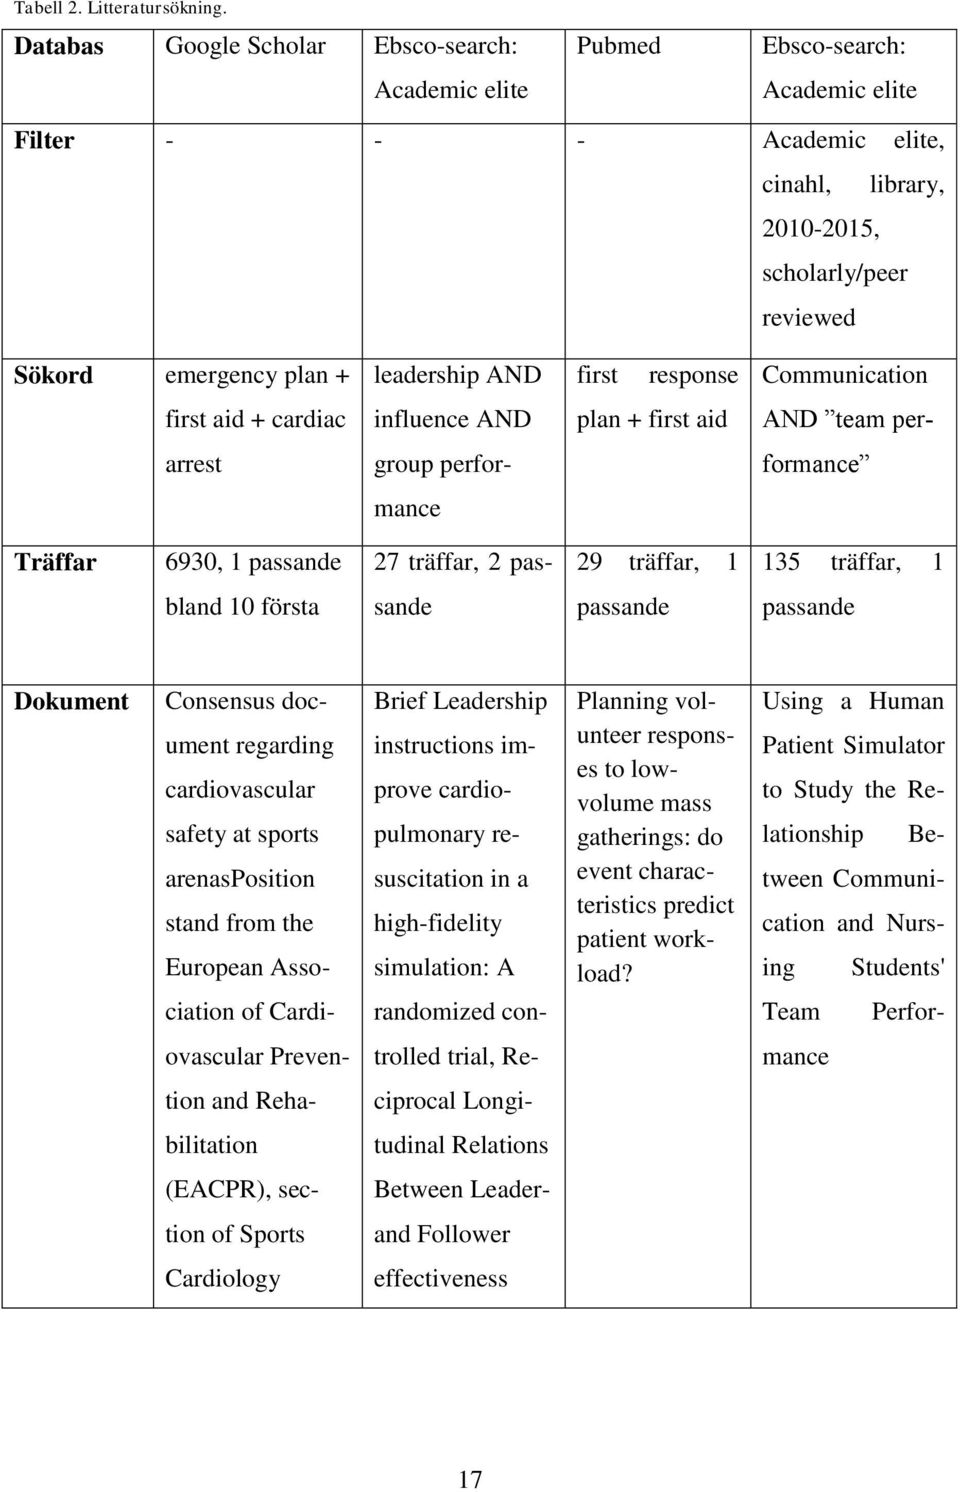 leadership AND first response Communication first aid + cardiac influence AND plan + first aid AND team per- arrest group perfor- formance mance Träffar 6930, 1 passande 27 träffar, 2 pas- 29